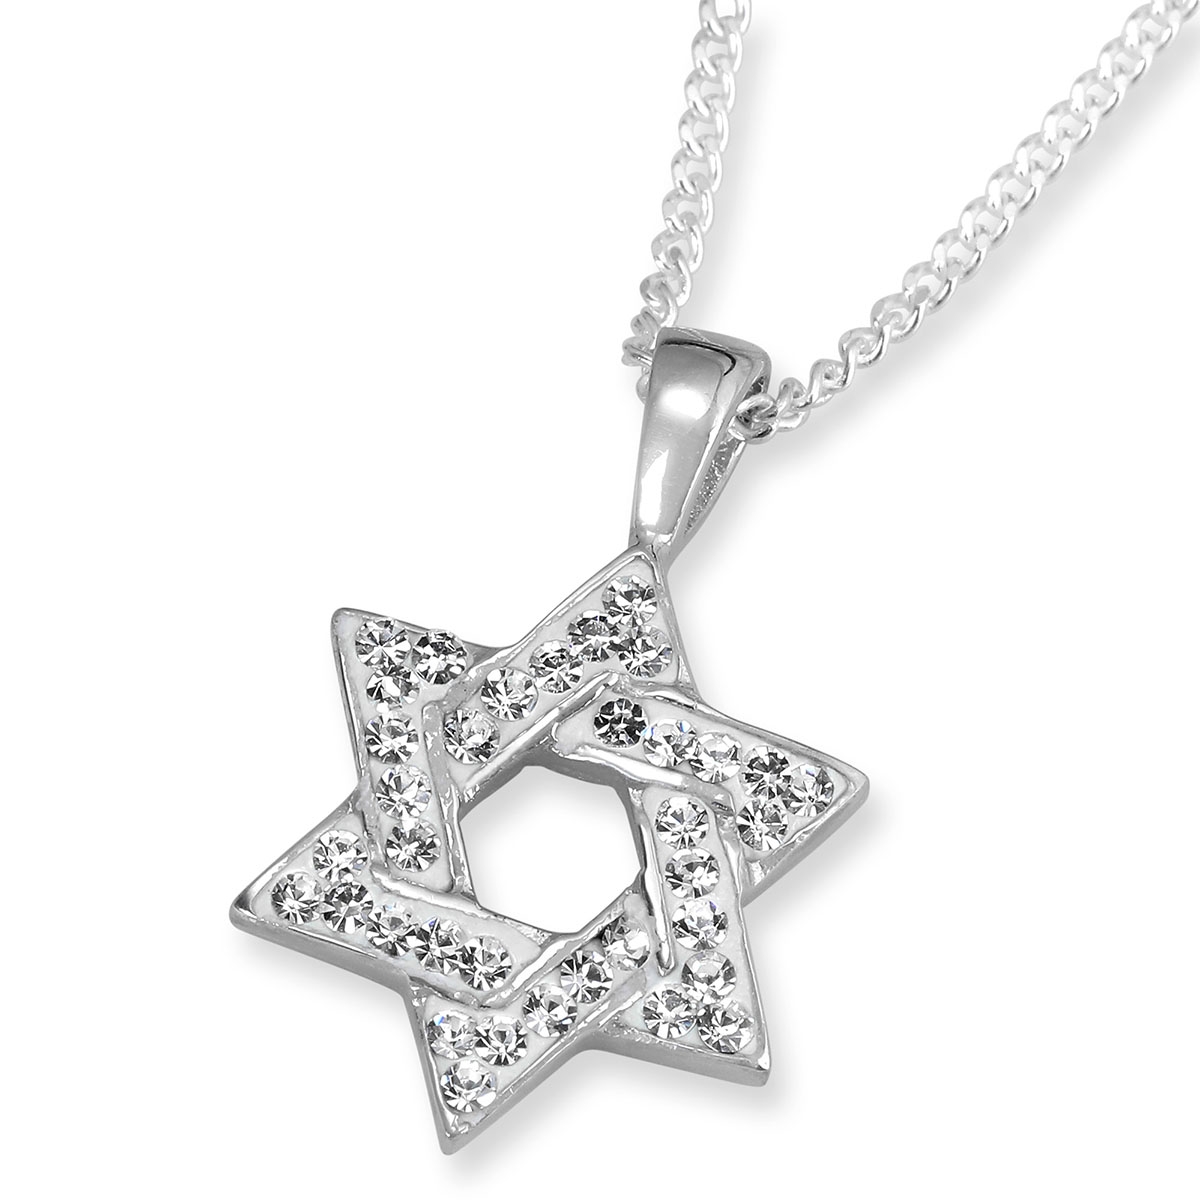 Chic 925 Sterling Silver Star of David Pendant With White Zircon Stones - 1